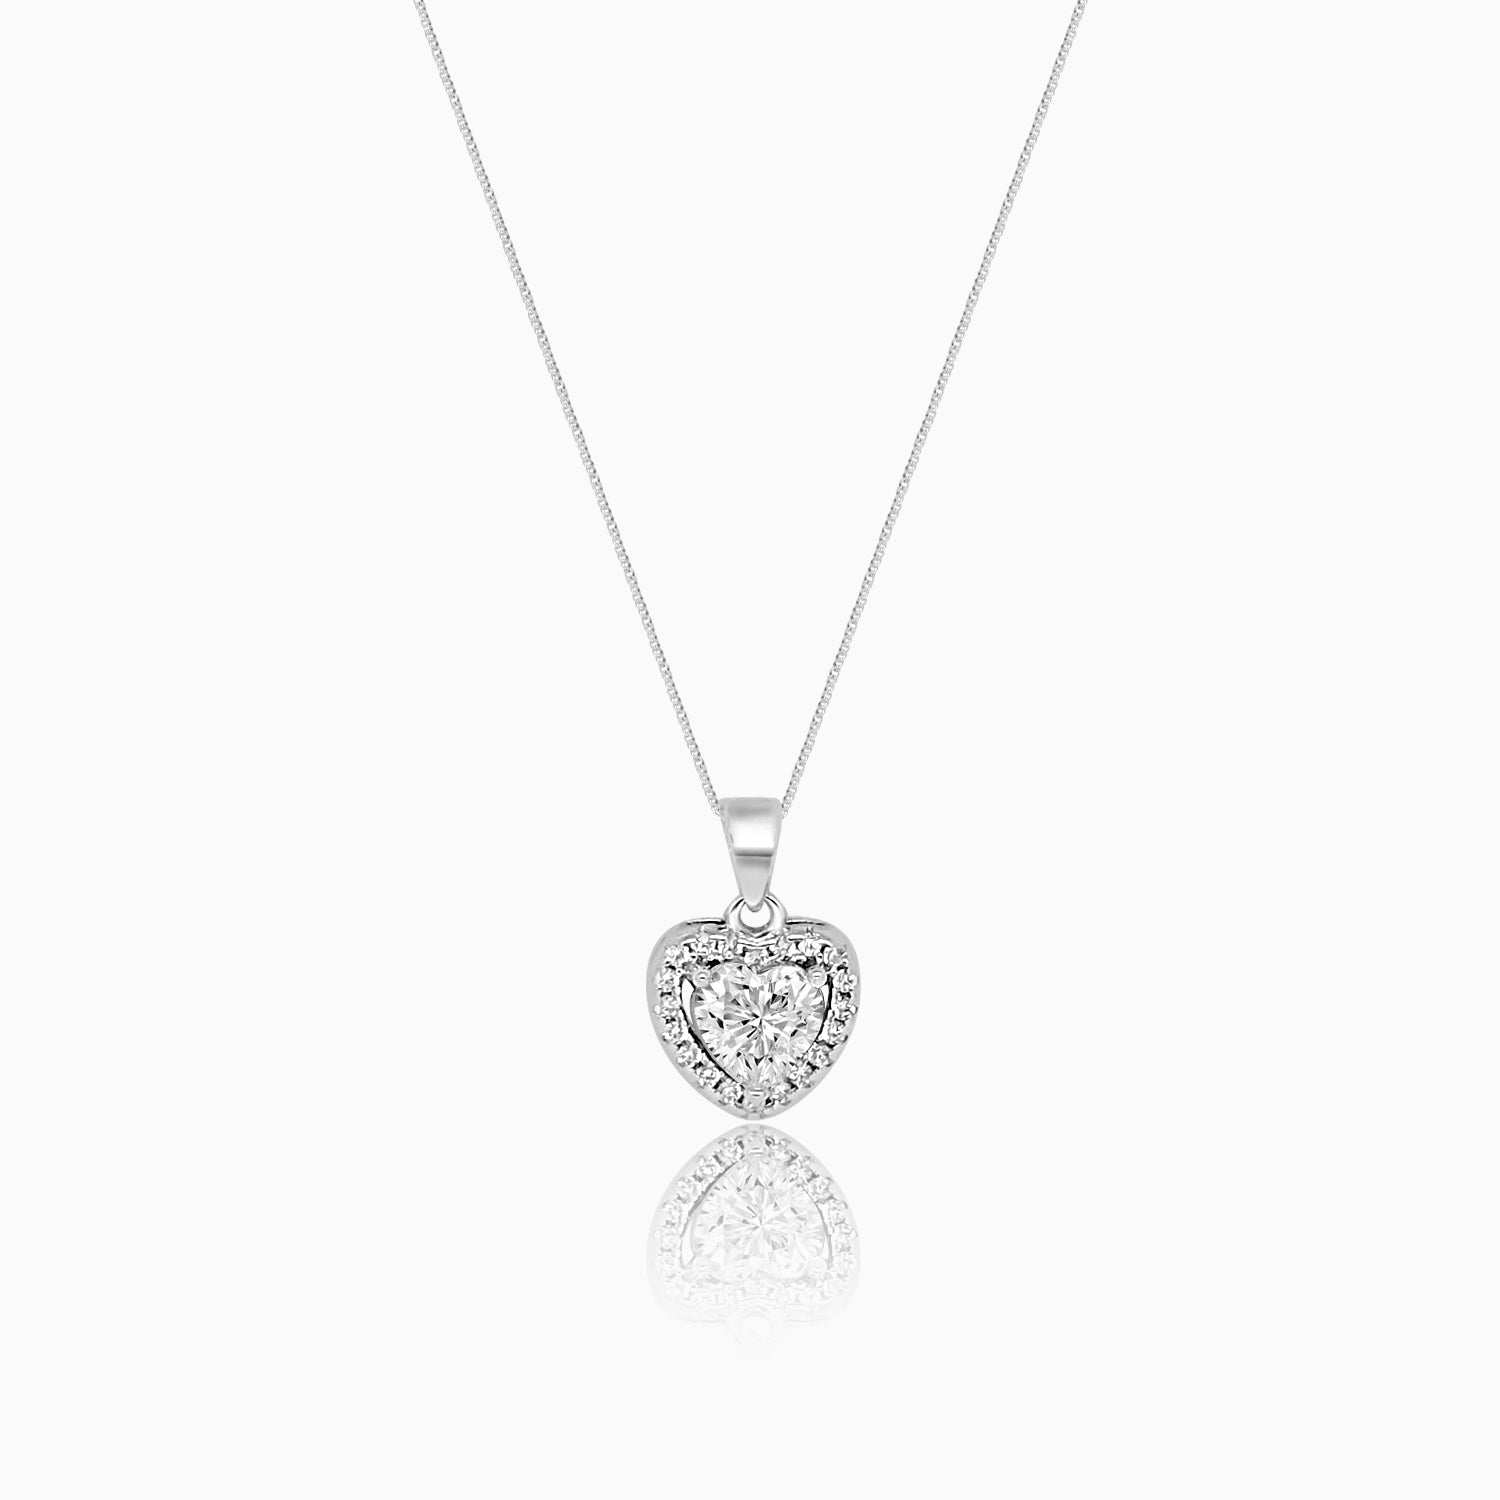 Silver Sparkling Awe Heart Solitaire Pendant